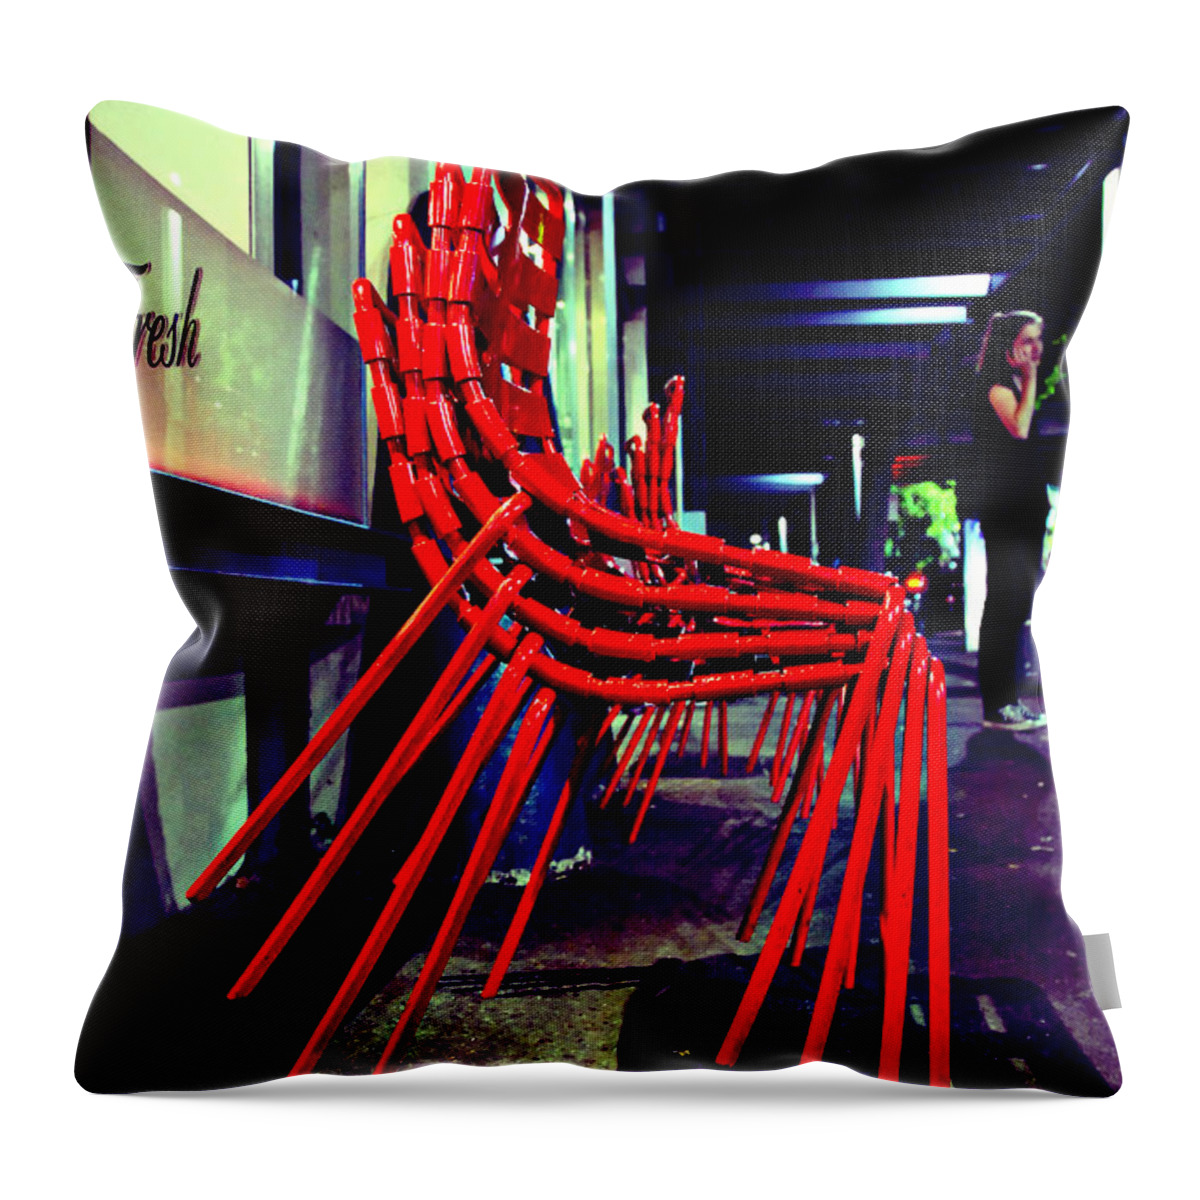 The Rocks Throw Pillow featuring the photograph Hard day's night by Andrei SKY